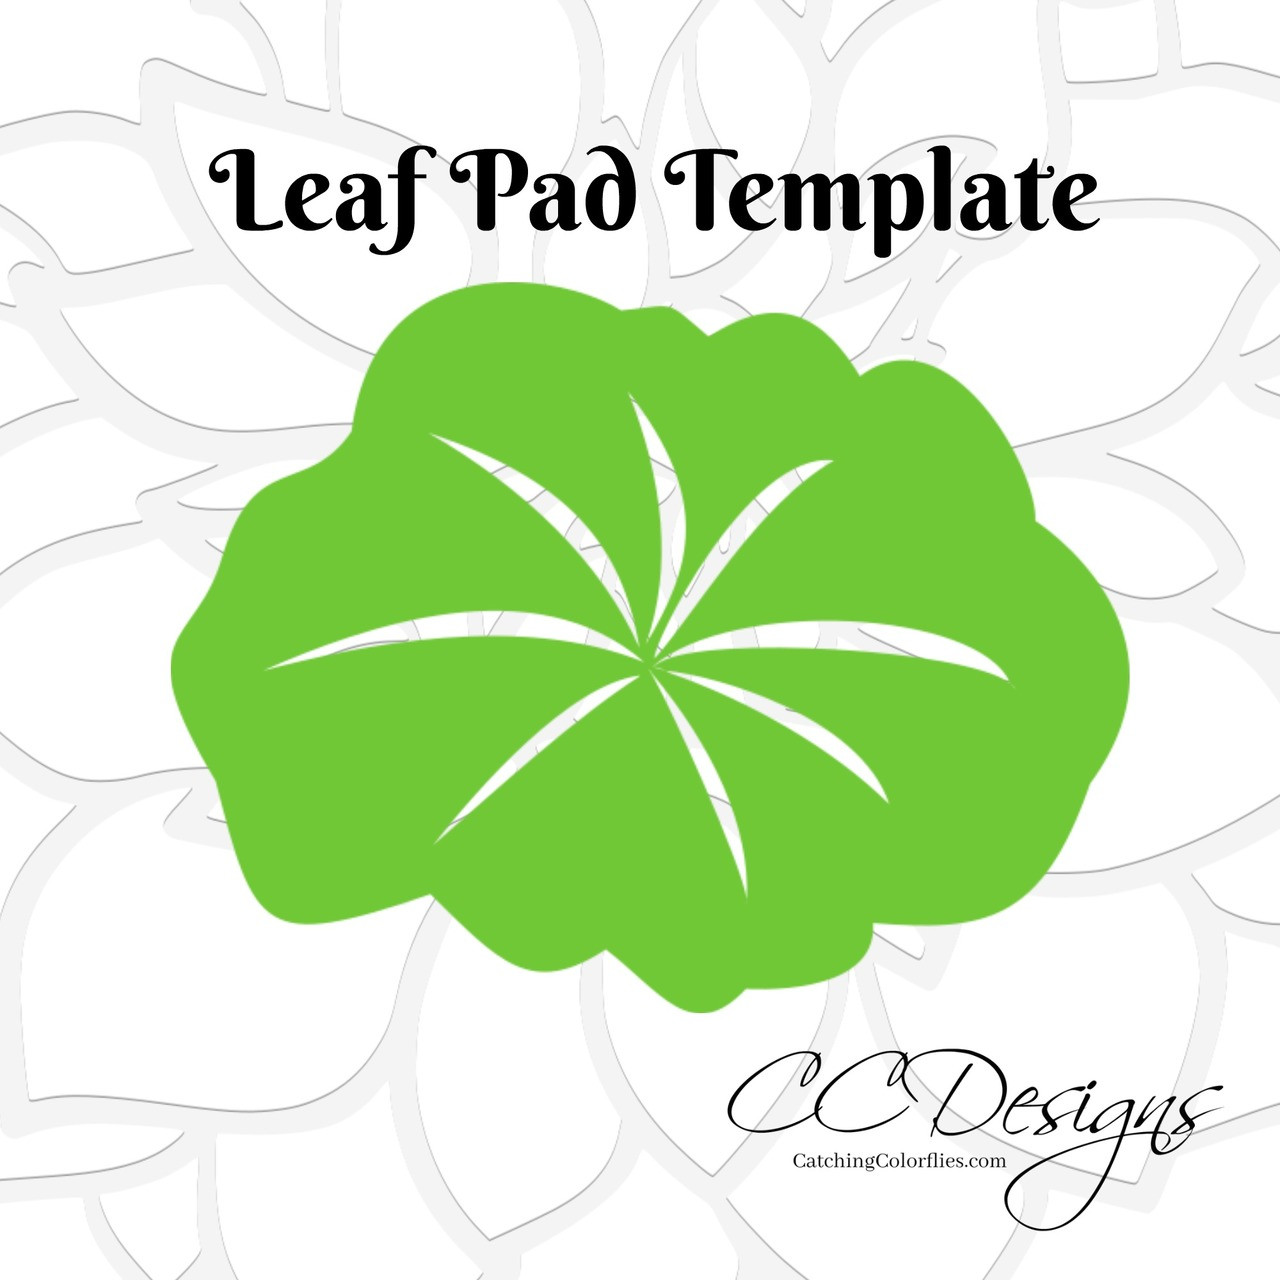 lotus style paper flower templates catching colorflies